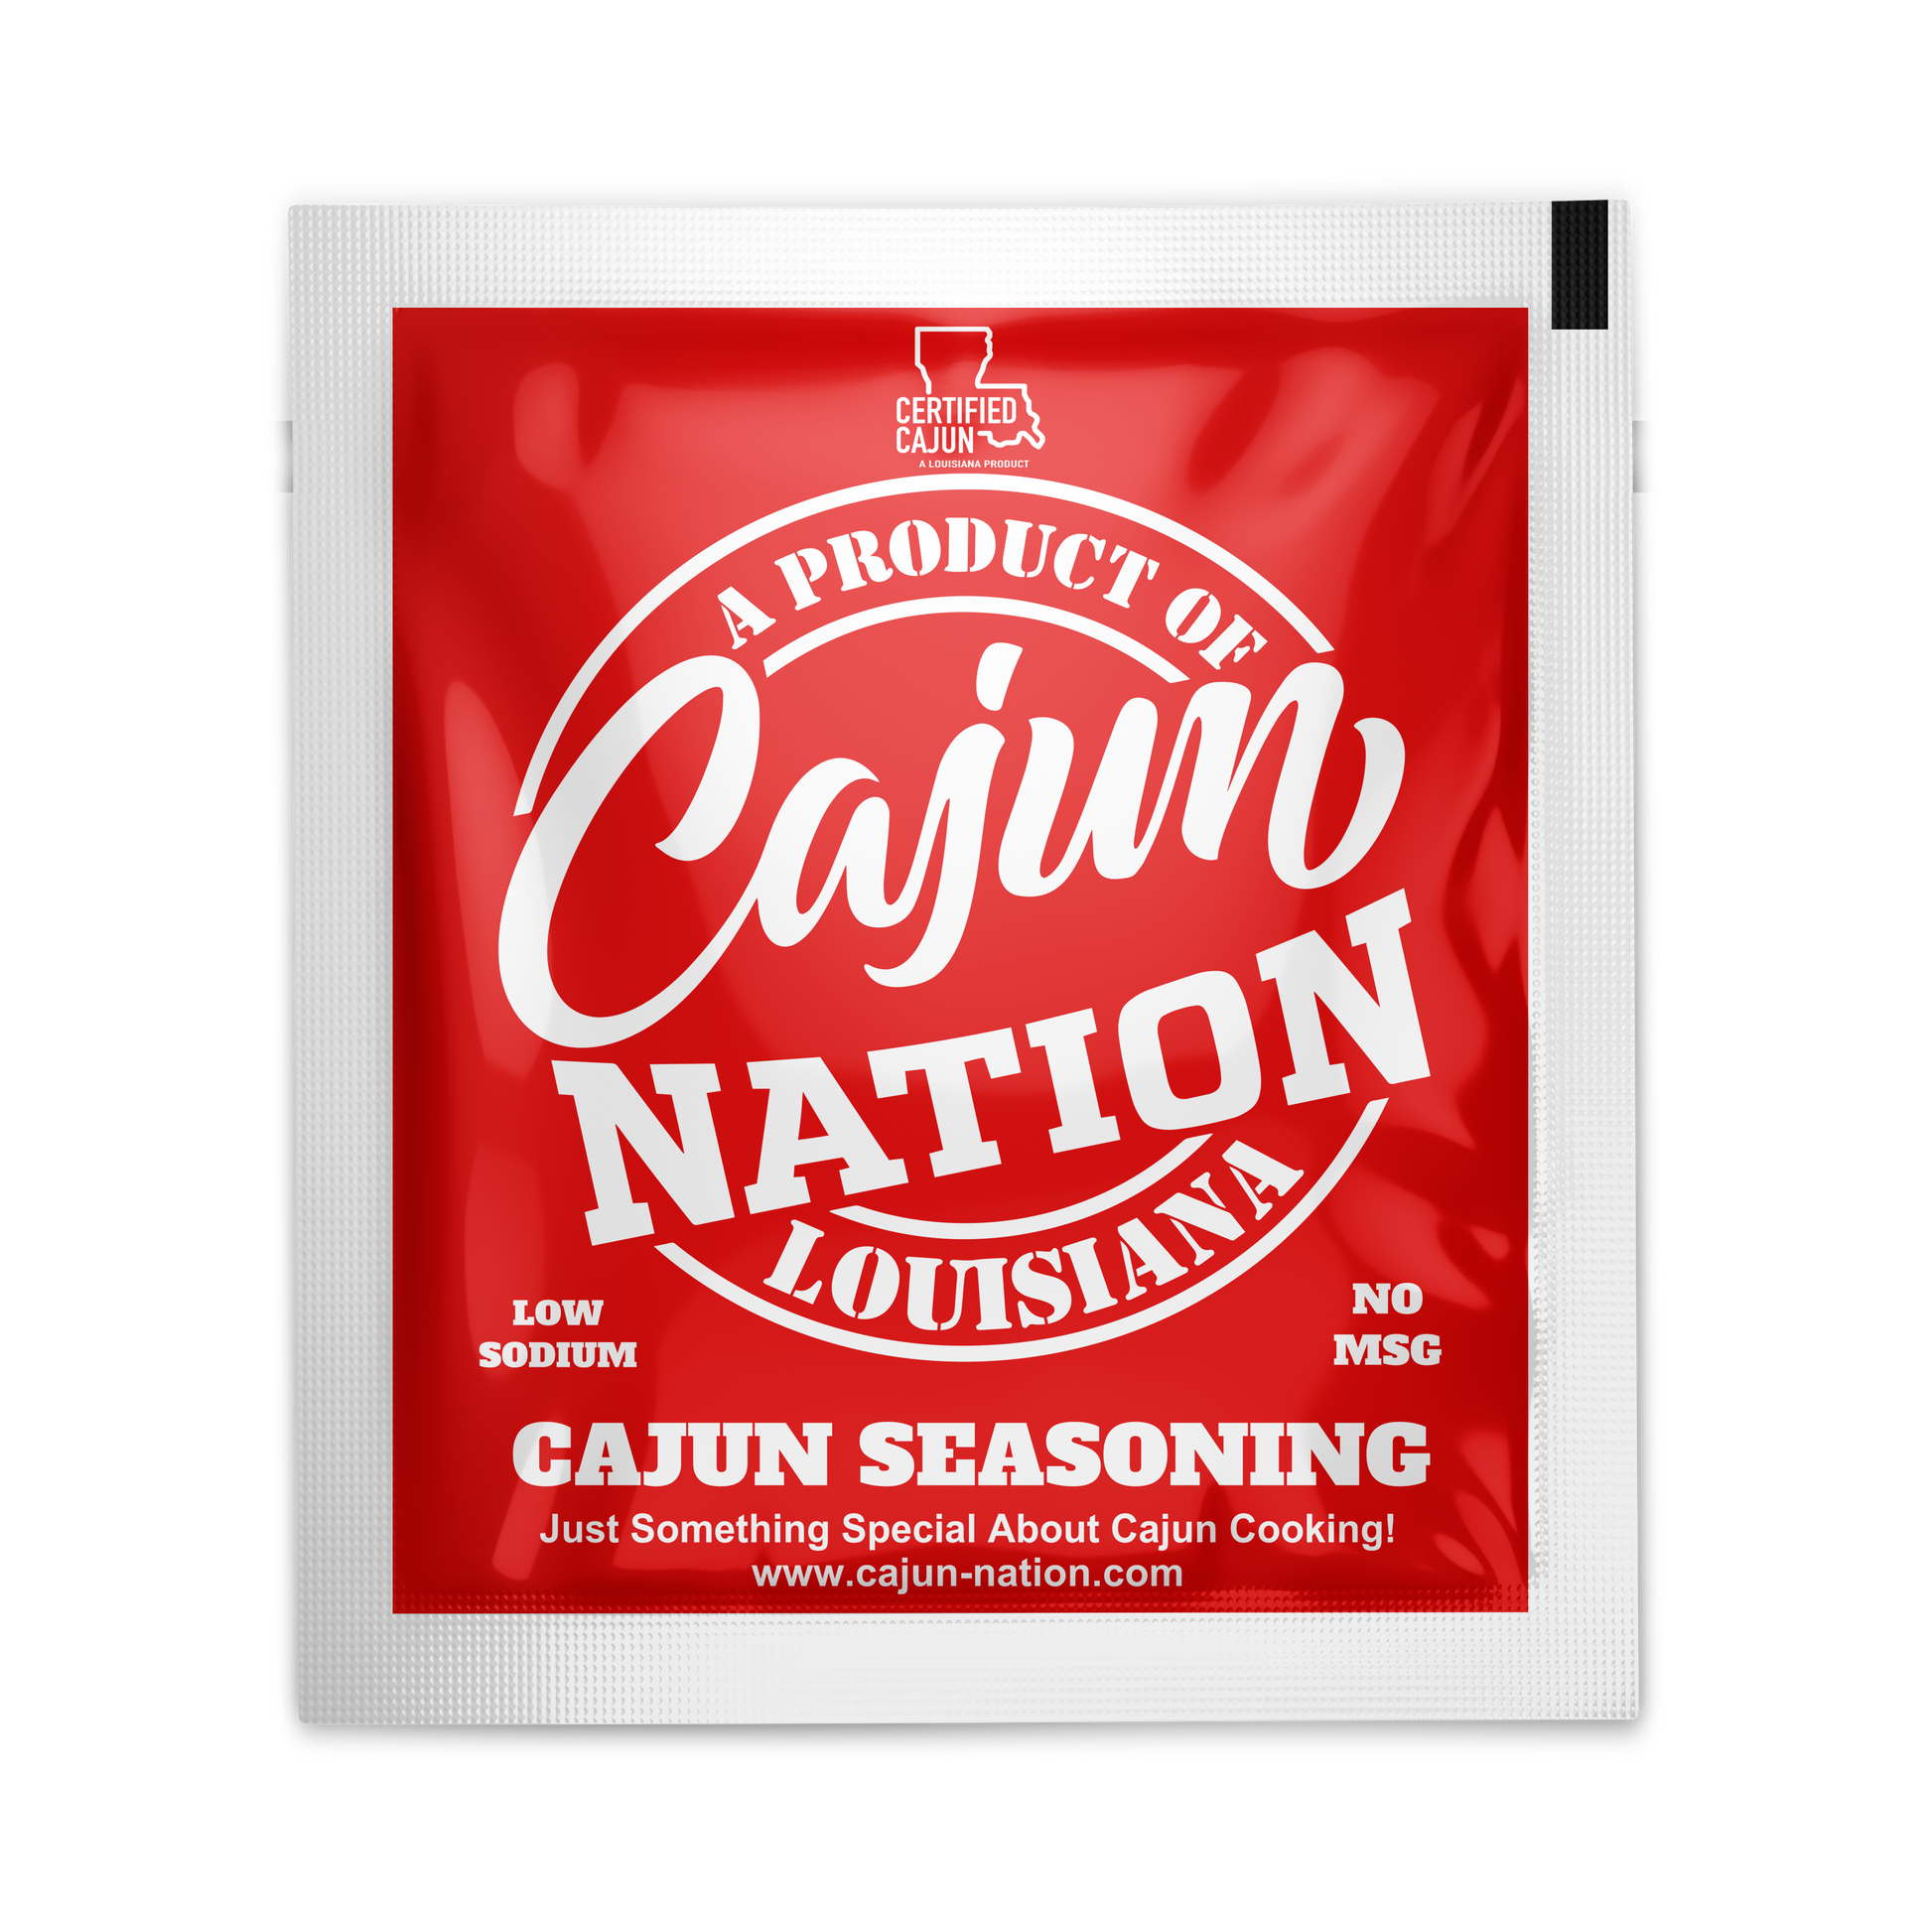 Cajun Nation LOW SODIUM Cajun Seasoning Packets are a Certified Cajun flavorful blend of Cajun Spices with No MSG and Gluten-Free. Ingredients: Salt, Black Pepper, Dextrose, Granulated Garlic, Granulated Onion, Paprika, Red Pepper, Silicon Dioxide (to prevent caking).&nbsp; Blended in Cajun Nation, Louisiana along the Cajun Coast.